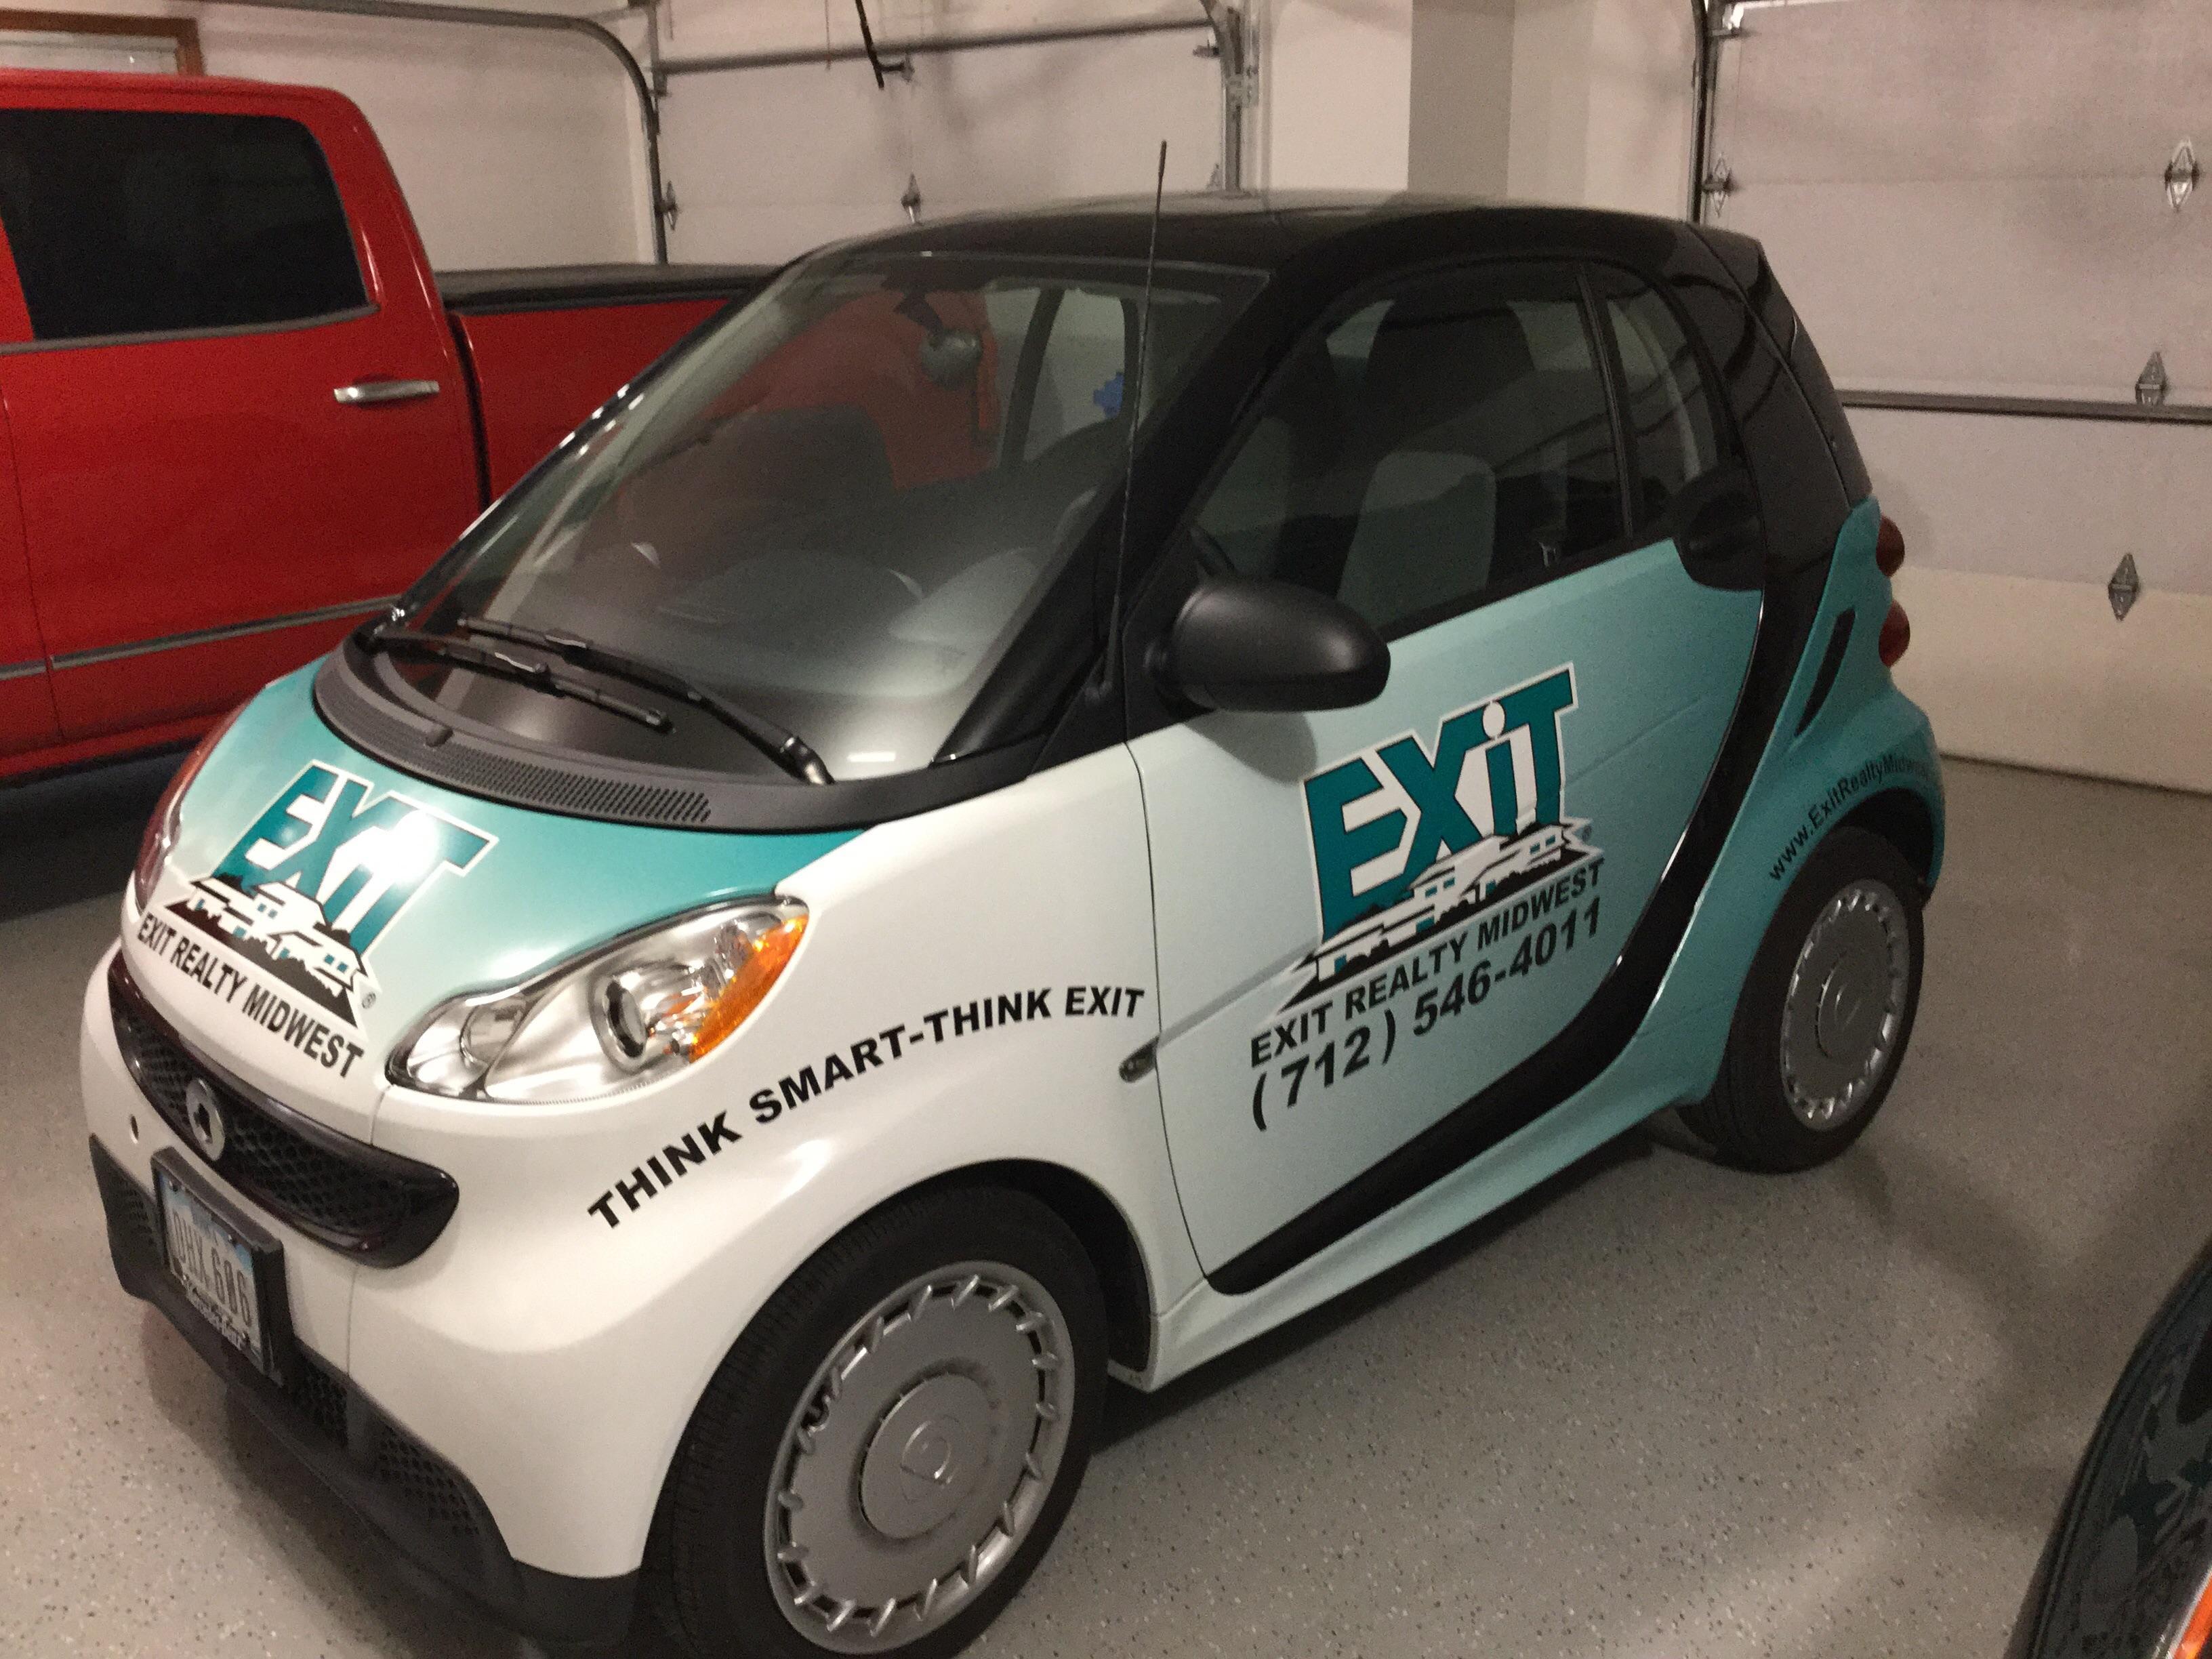 EXIT Realty provides a Mercedes Benz Smart Car for all the special occasions in a realtors day: open houses, parades, chamber events, etc.